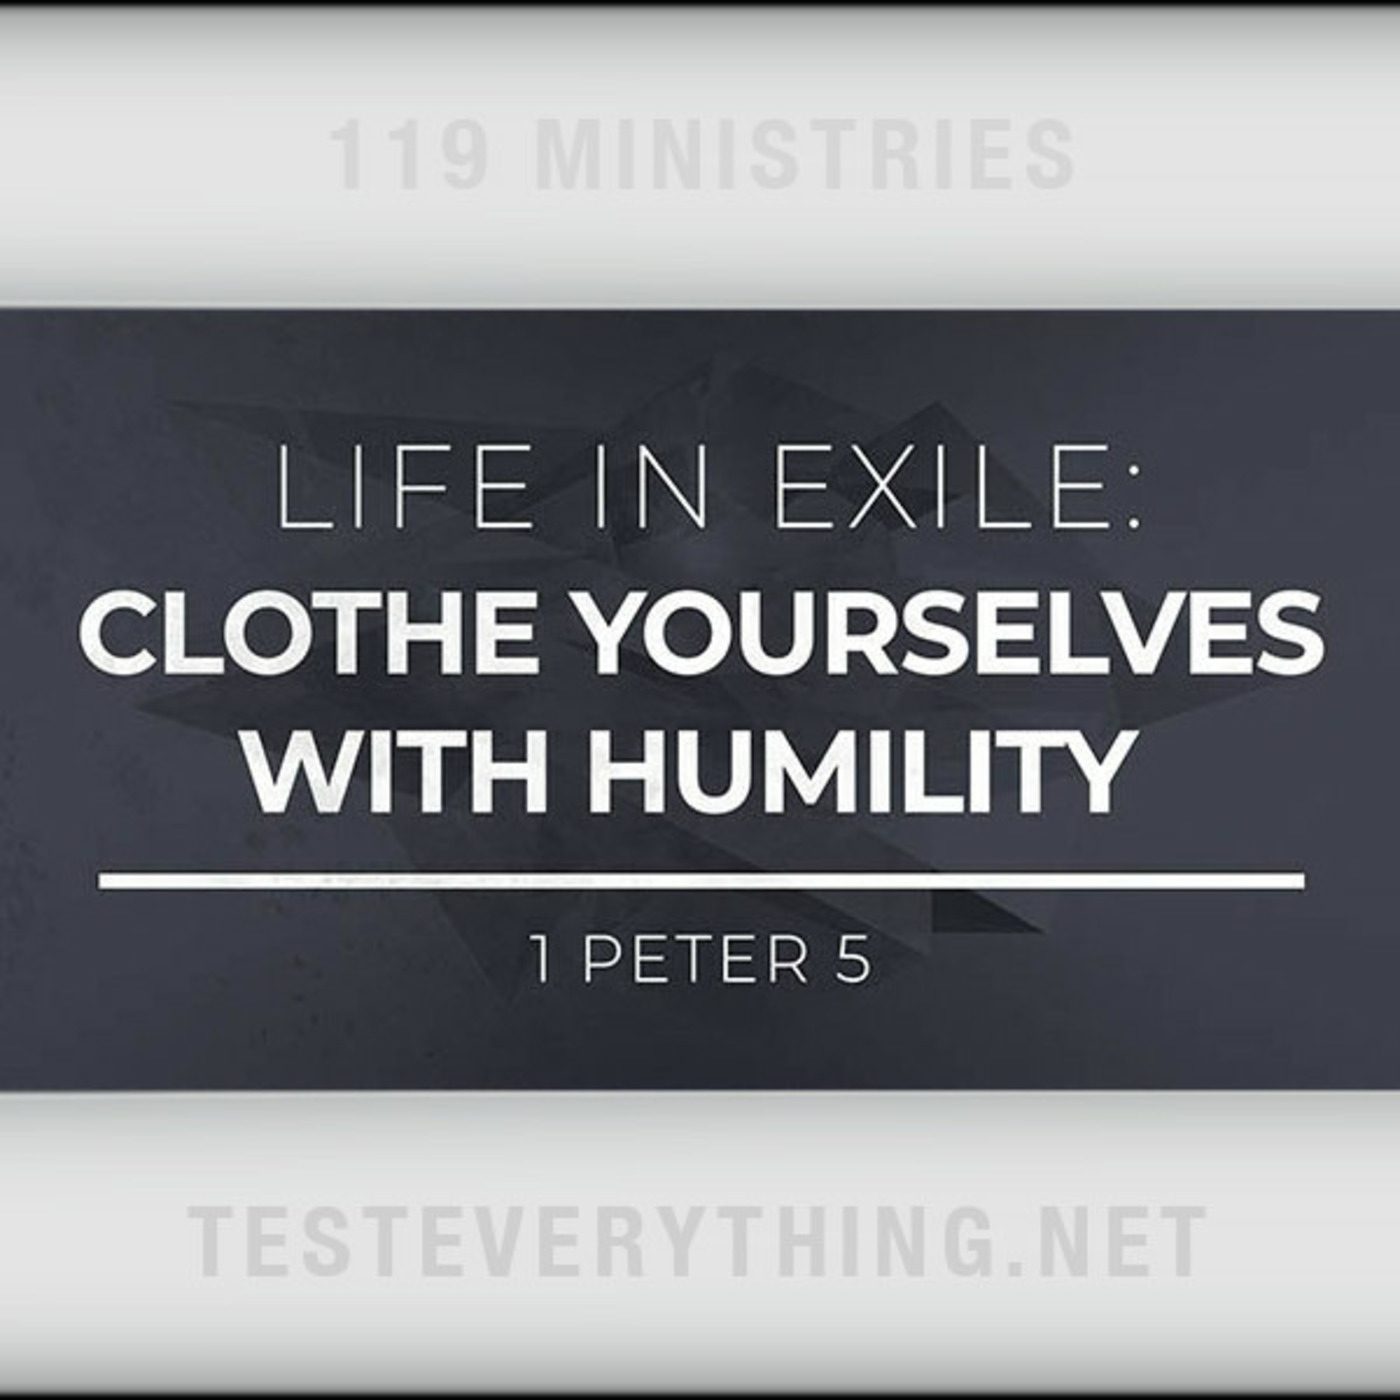 Episode 558: BS: Life in Exile - Clothe Yourselves With Humility (1 Peter 5)